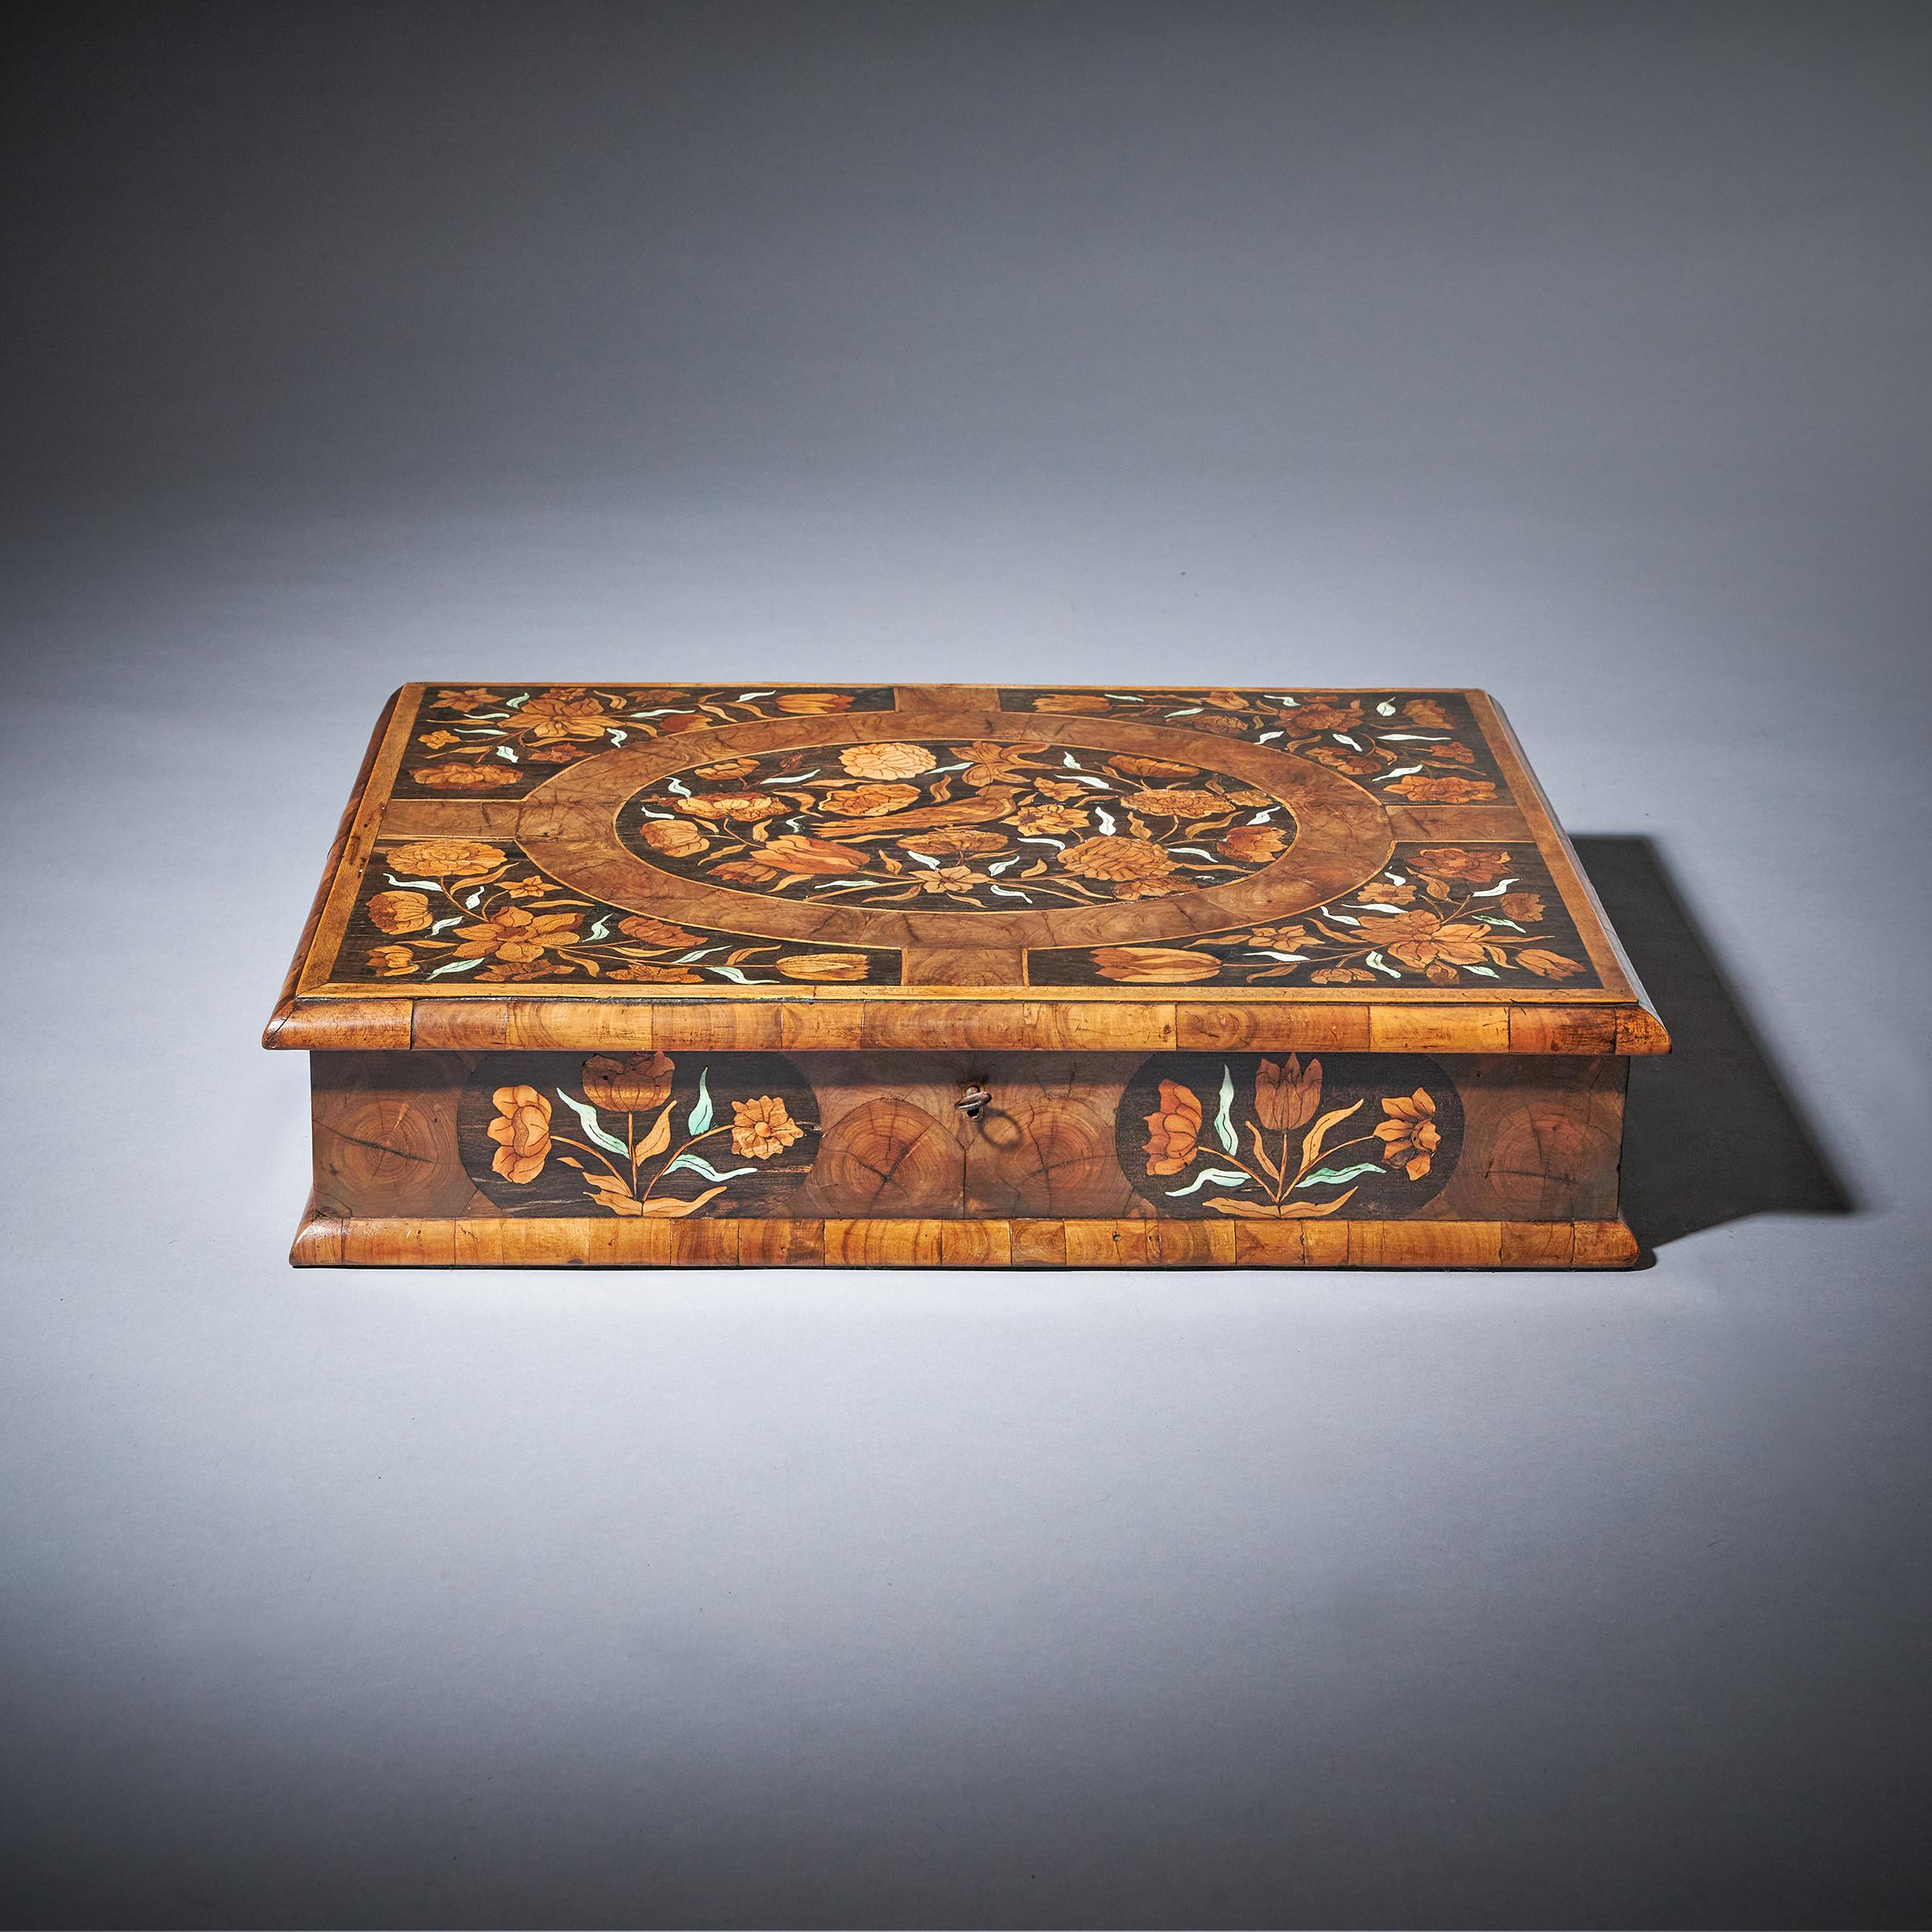 17th century Museum Grade William and Mary Olive Oyster Marquetry Lace box, C. 1670-1690. England

The ovolo-moulded and holly banded top is centred by an oval of marquetry depicting spring flowers bordered in oysters of olive finely strung to